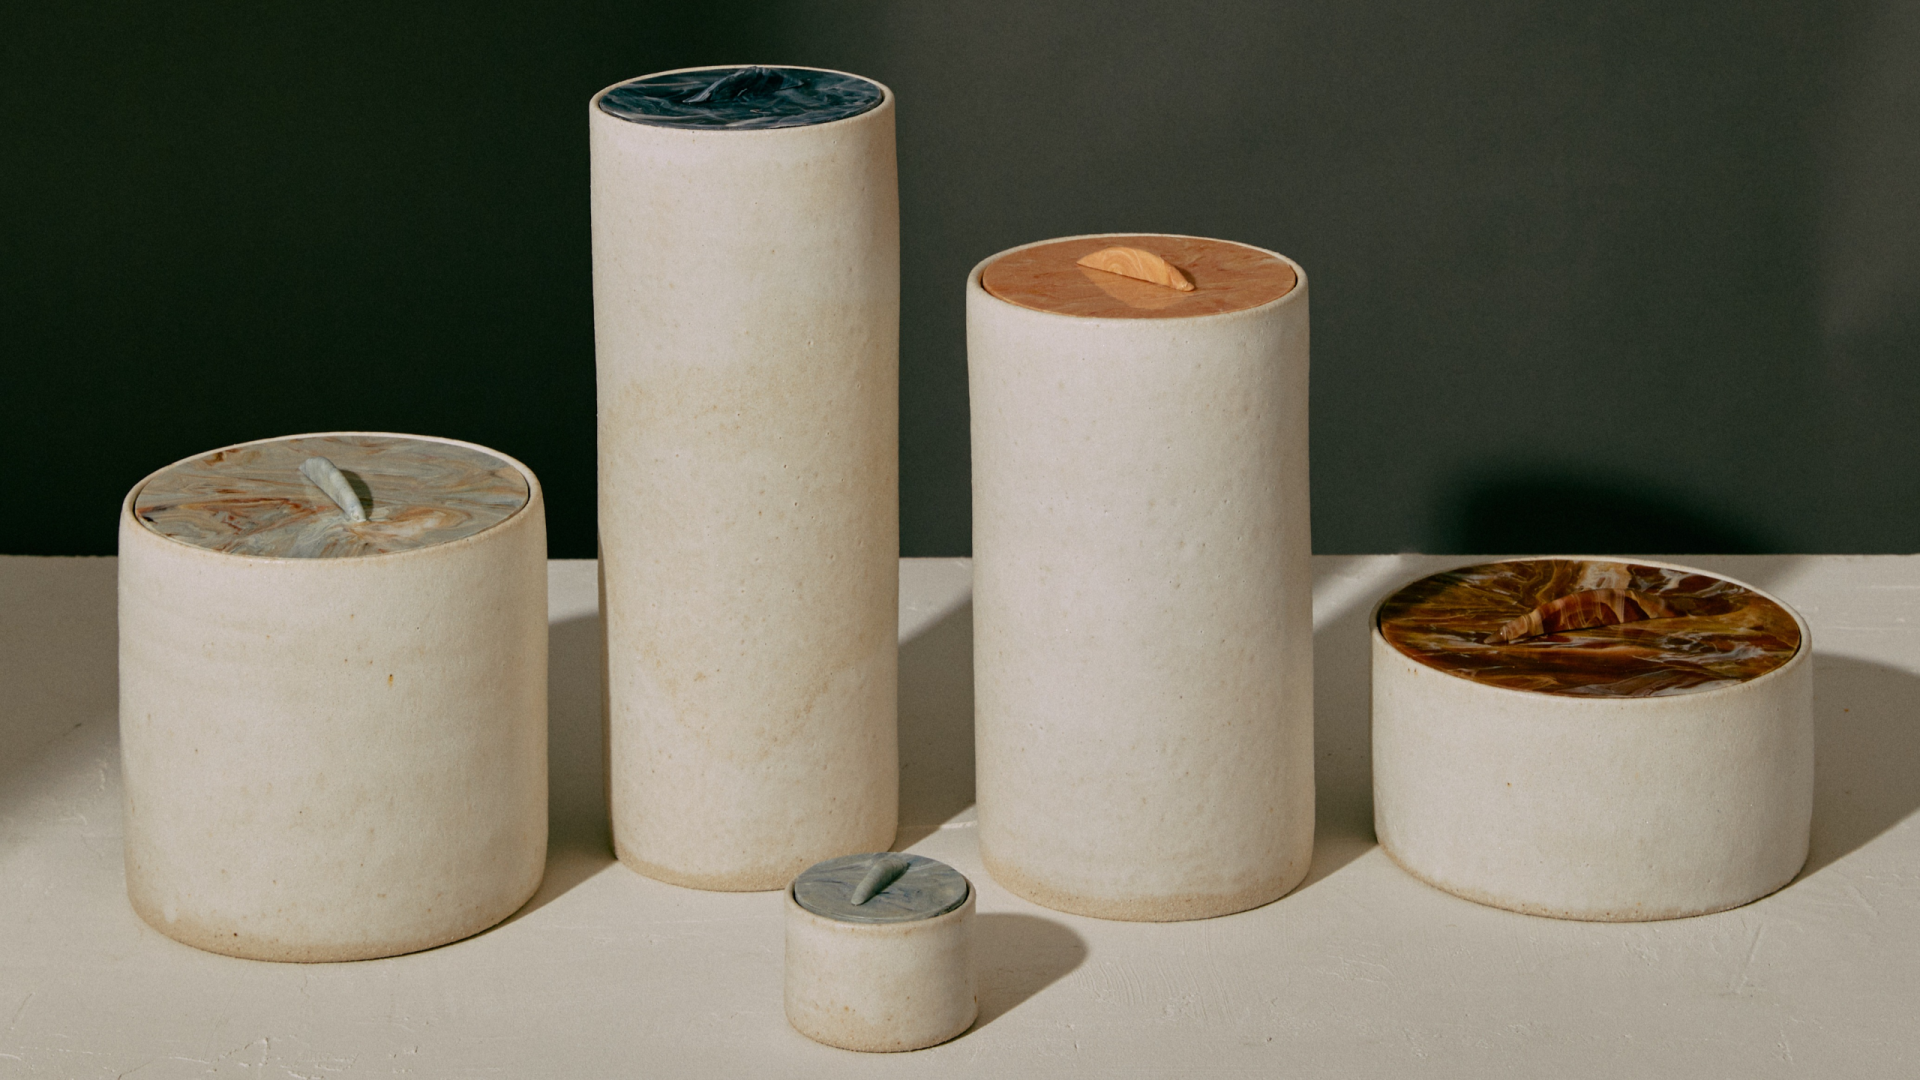 Photo of cylindrical white ceramic vessels in varying sizes with colourful marbled plastic lids